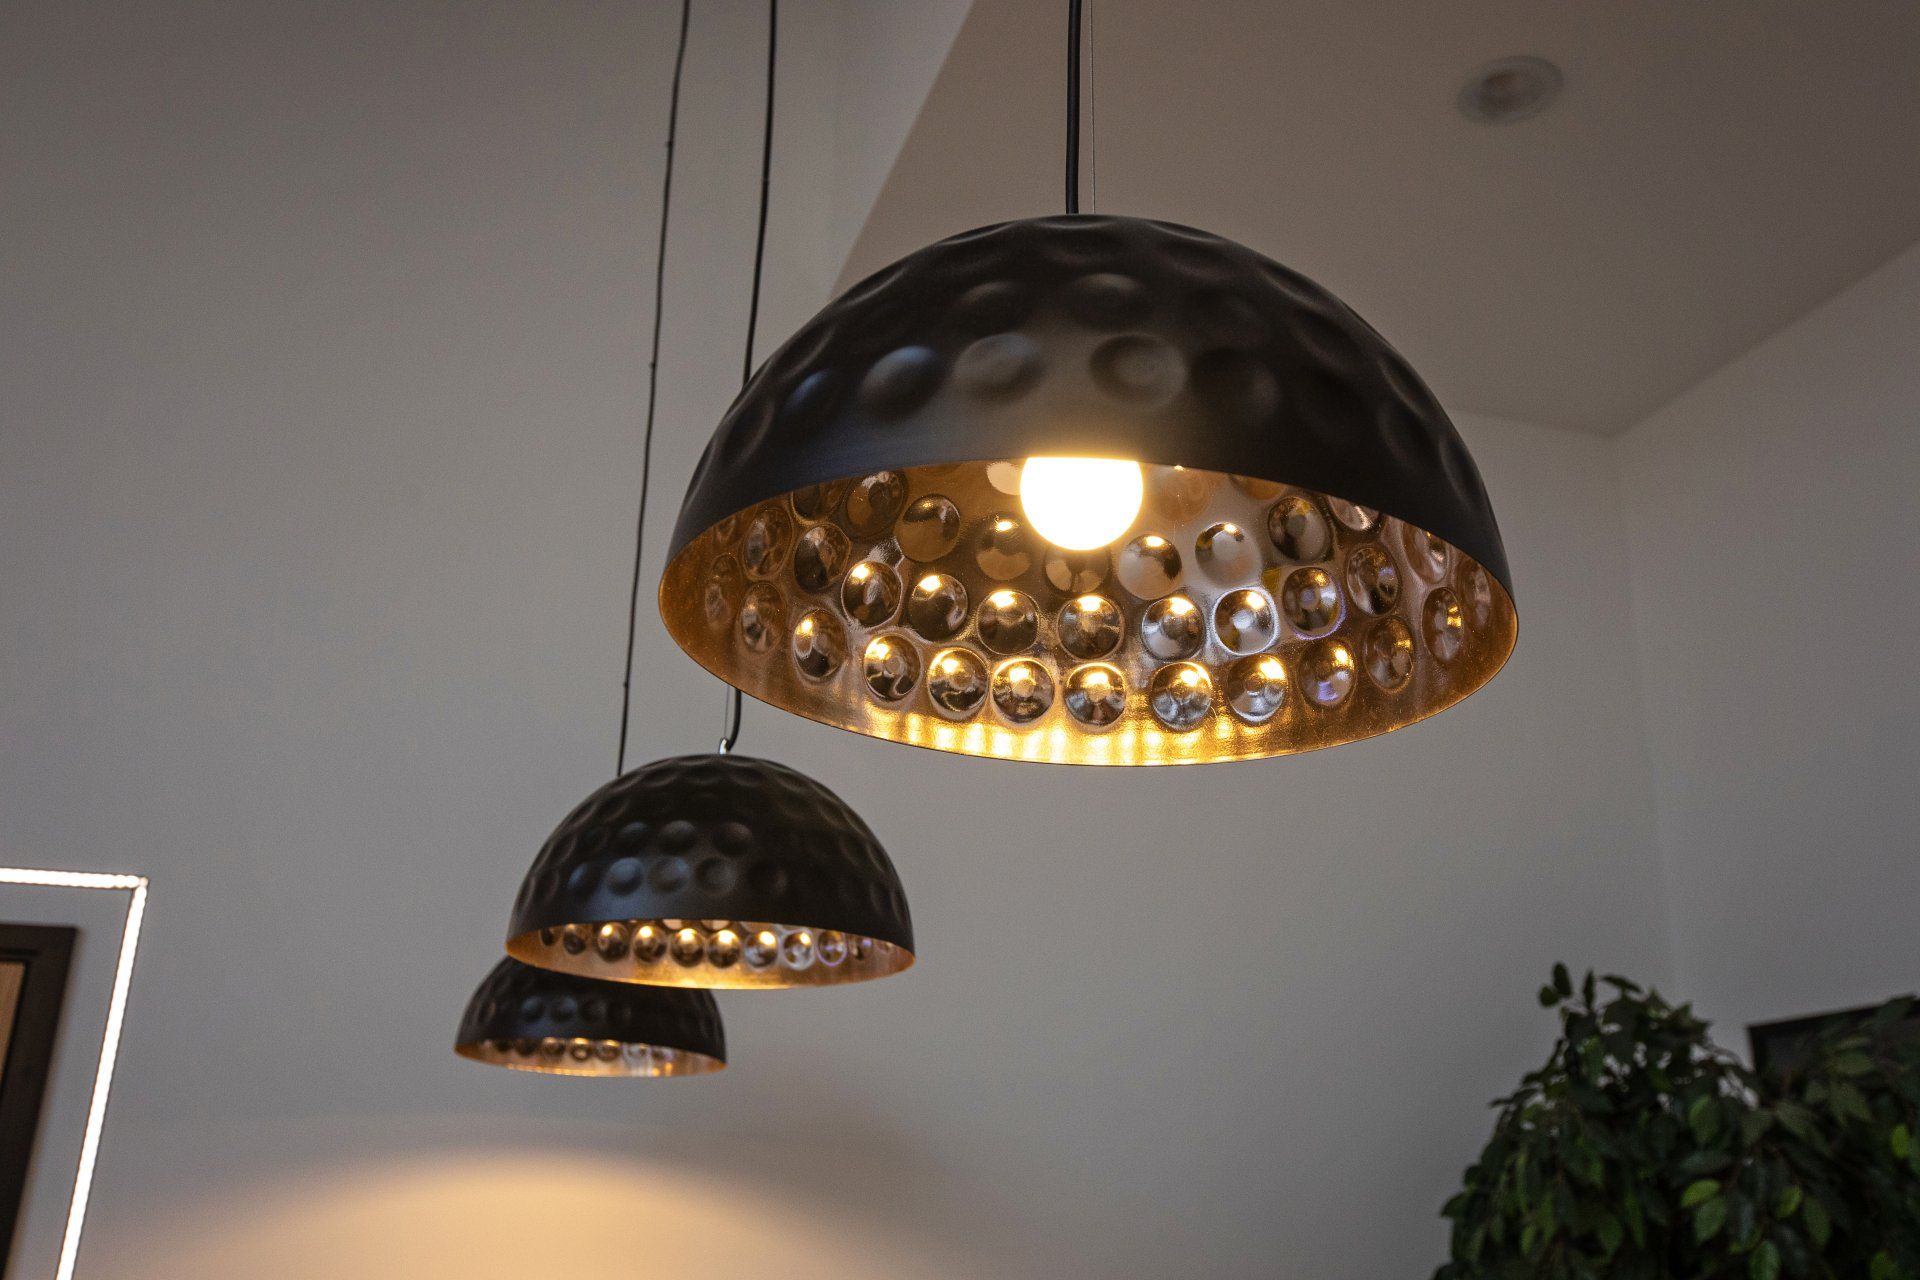 Two black and gold pendant lights are hanging from the ceiling